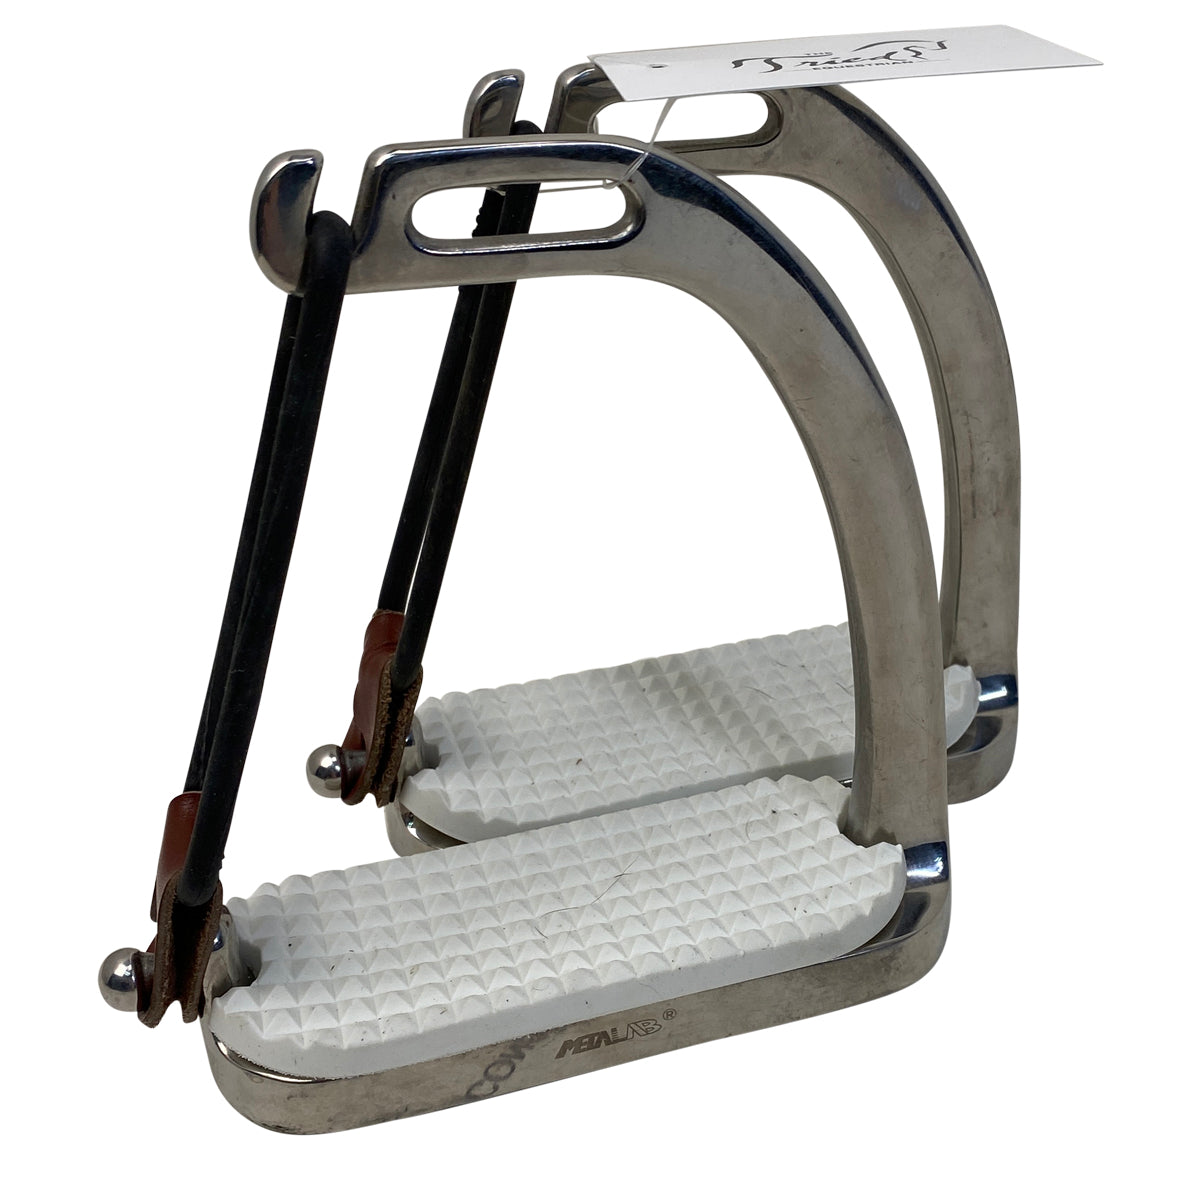 Centaur MetaLab Peacock Stirrup Irons in Stainess Steel